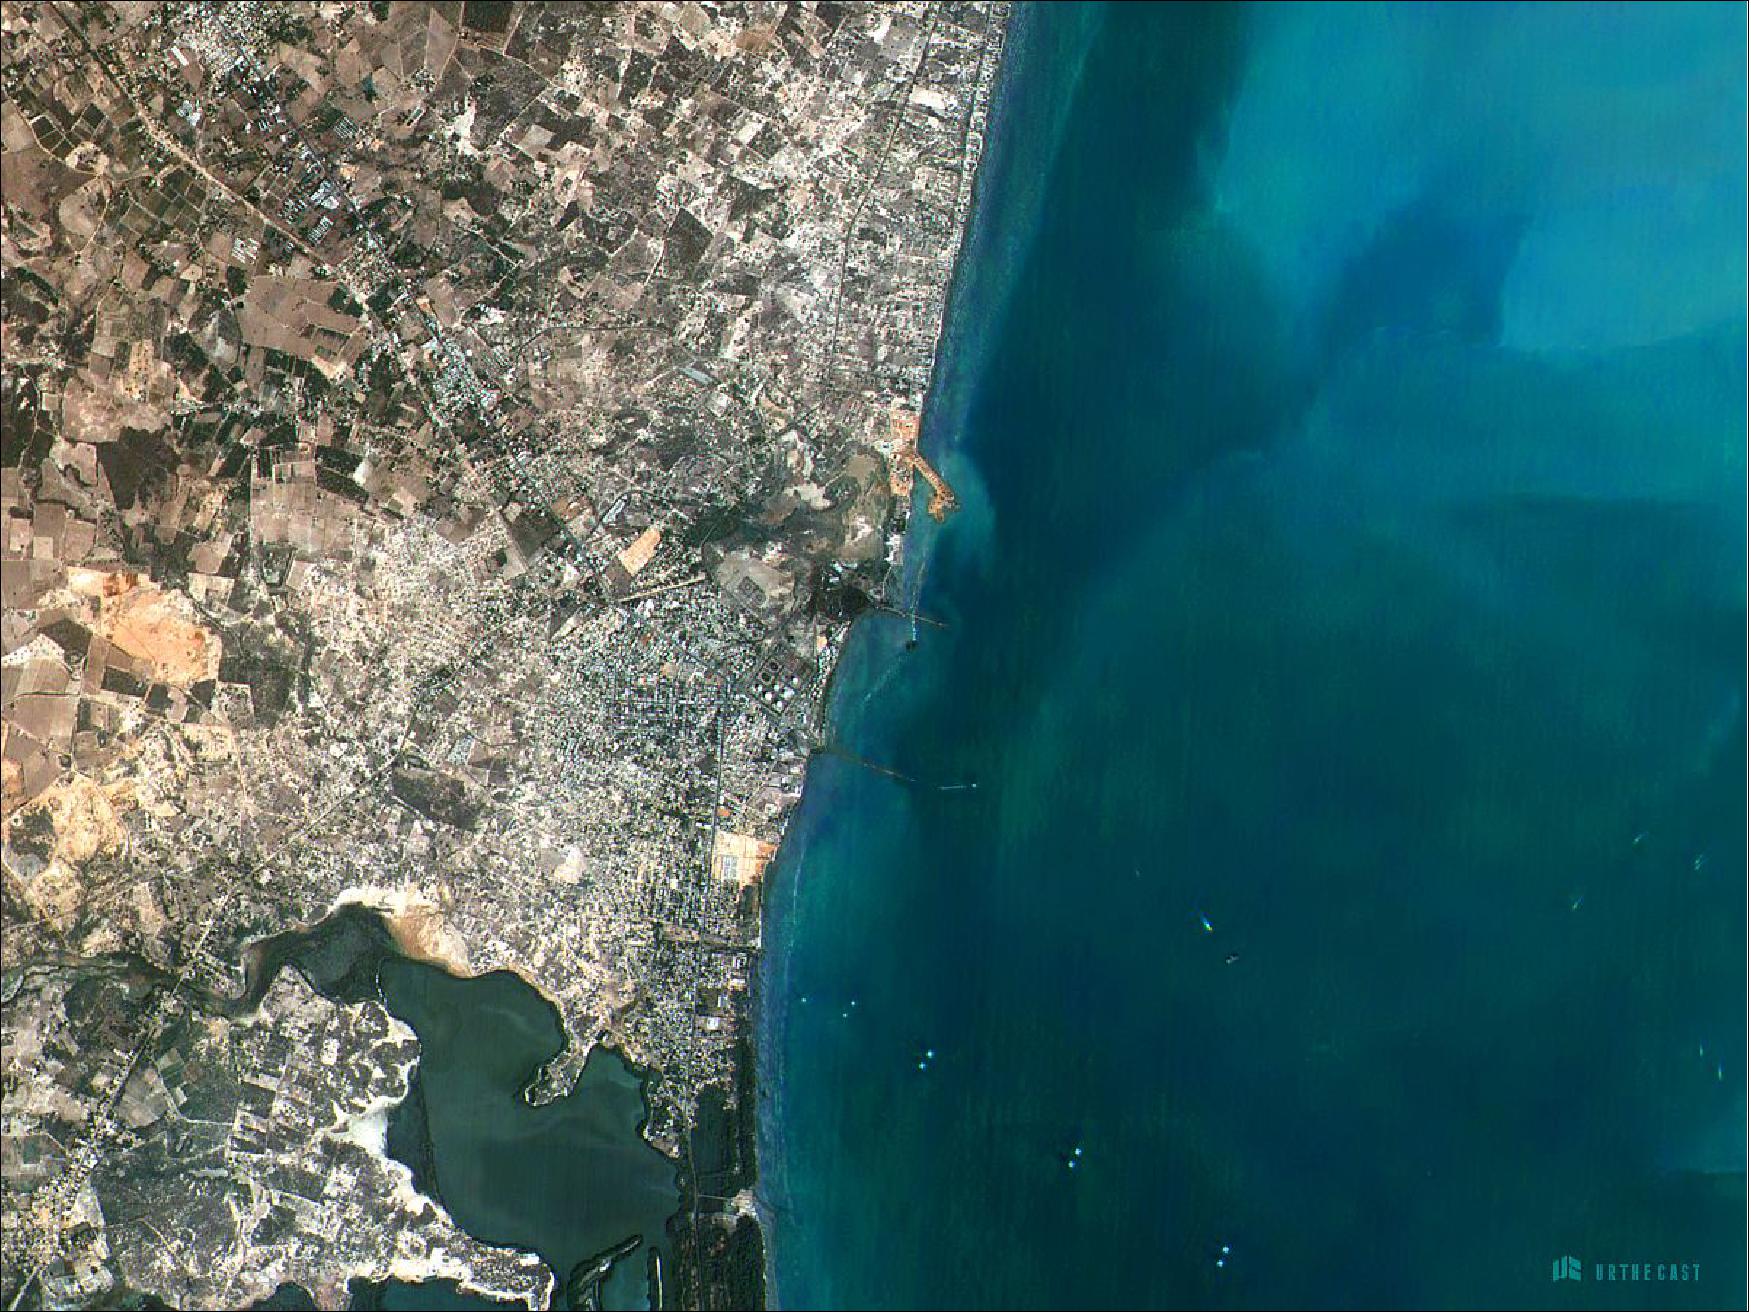 Figure 11: An early image of Venezuela from the UrtheCast cameras aboard the International Space Station (image credit: UrtheCast, Ref. 3)